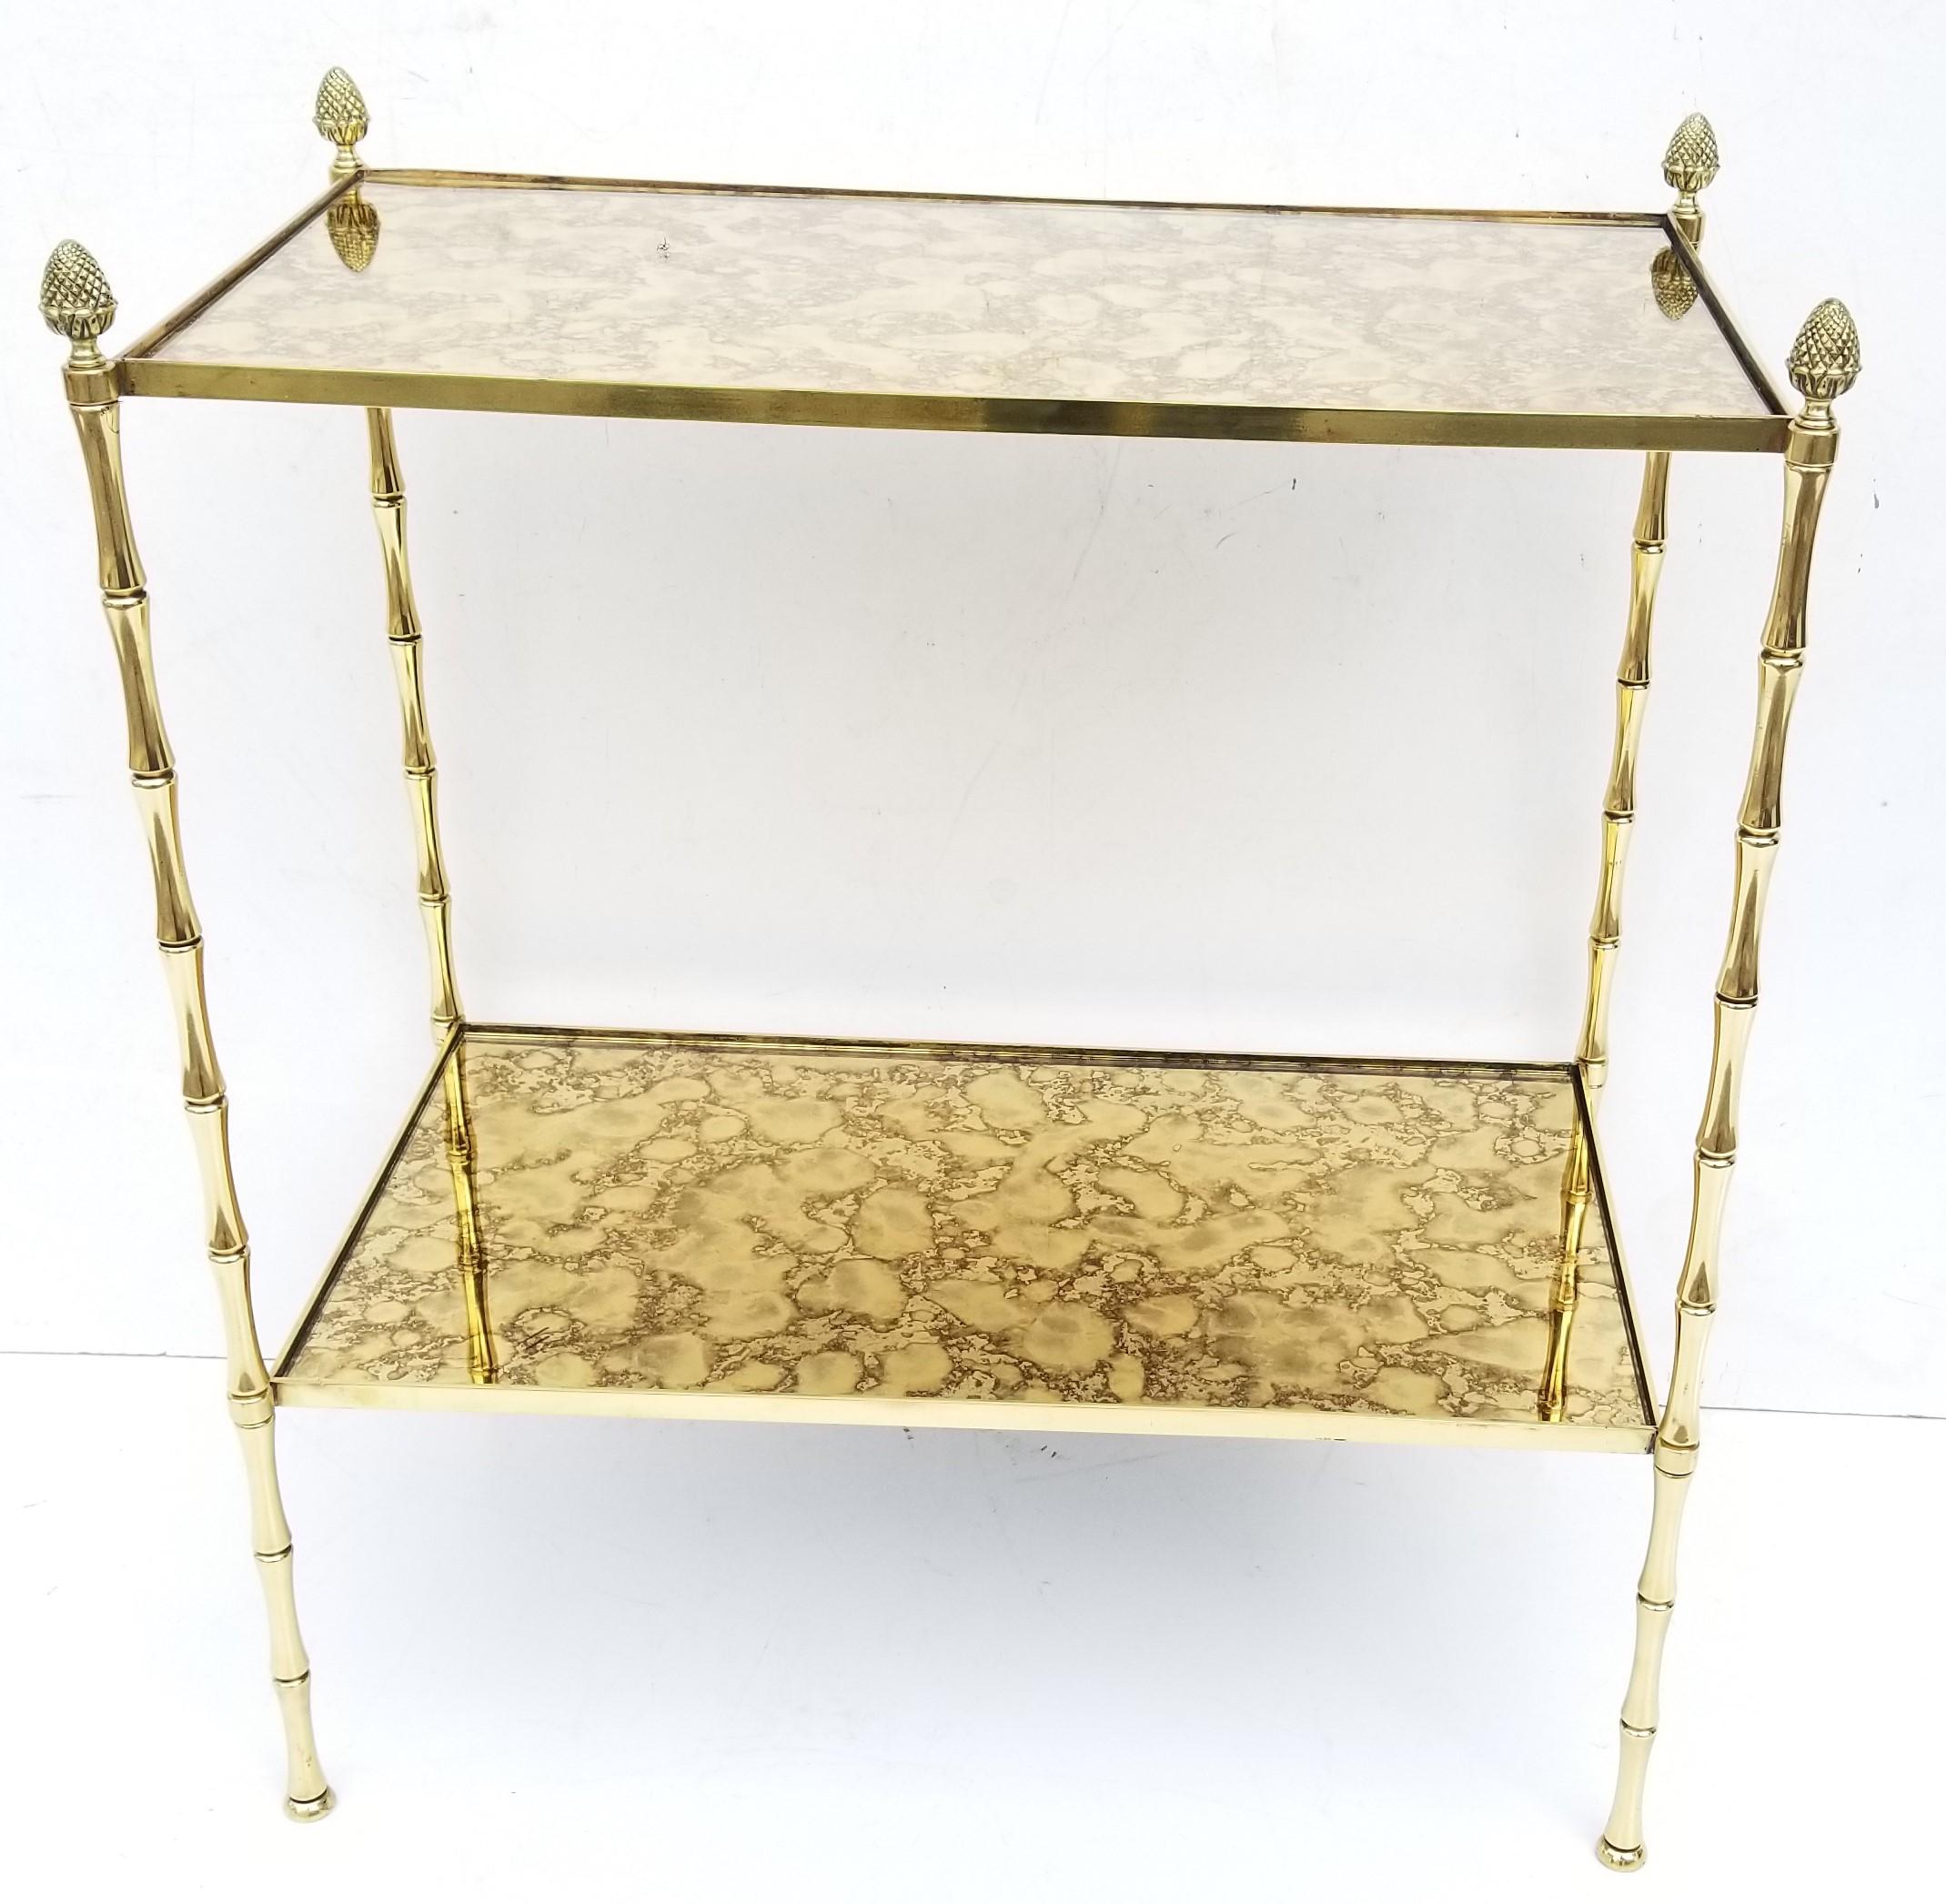 Maison Bagues rectangular side table
2 tiers, 1st tiers height: 8 in
Bronze ans brass, gold cloudy mirror.